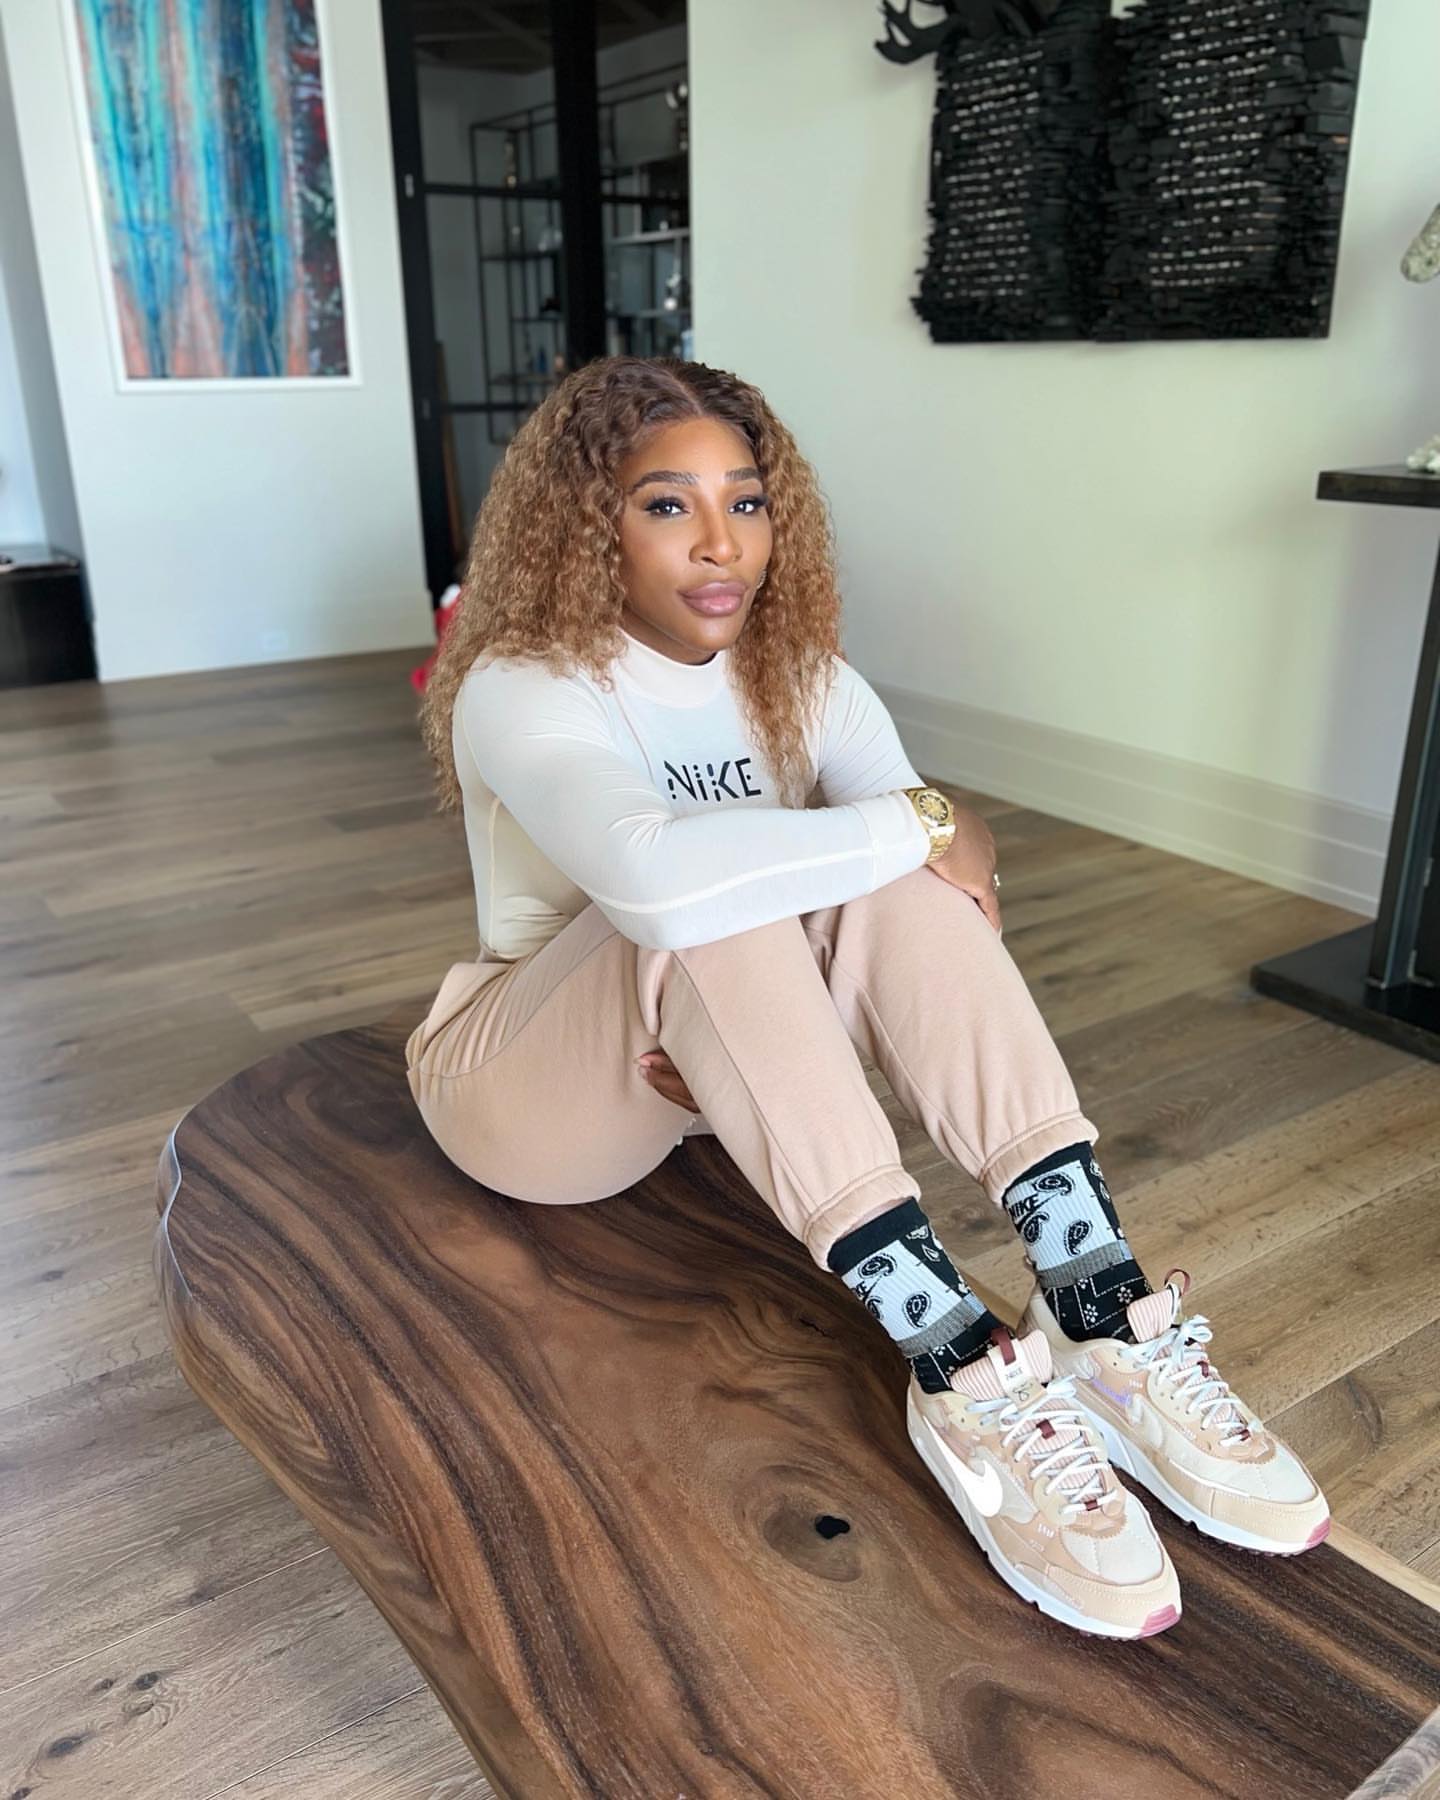 Serena Williams Shares Her Big Reveal! - Photo 19